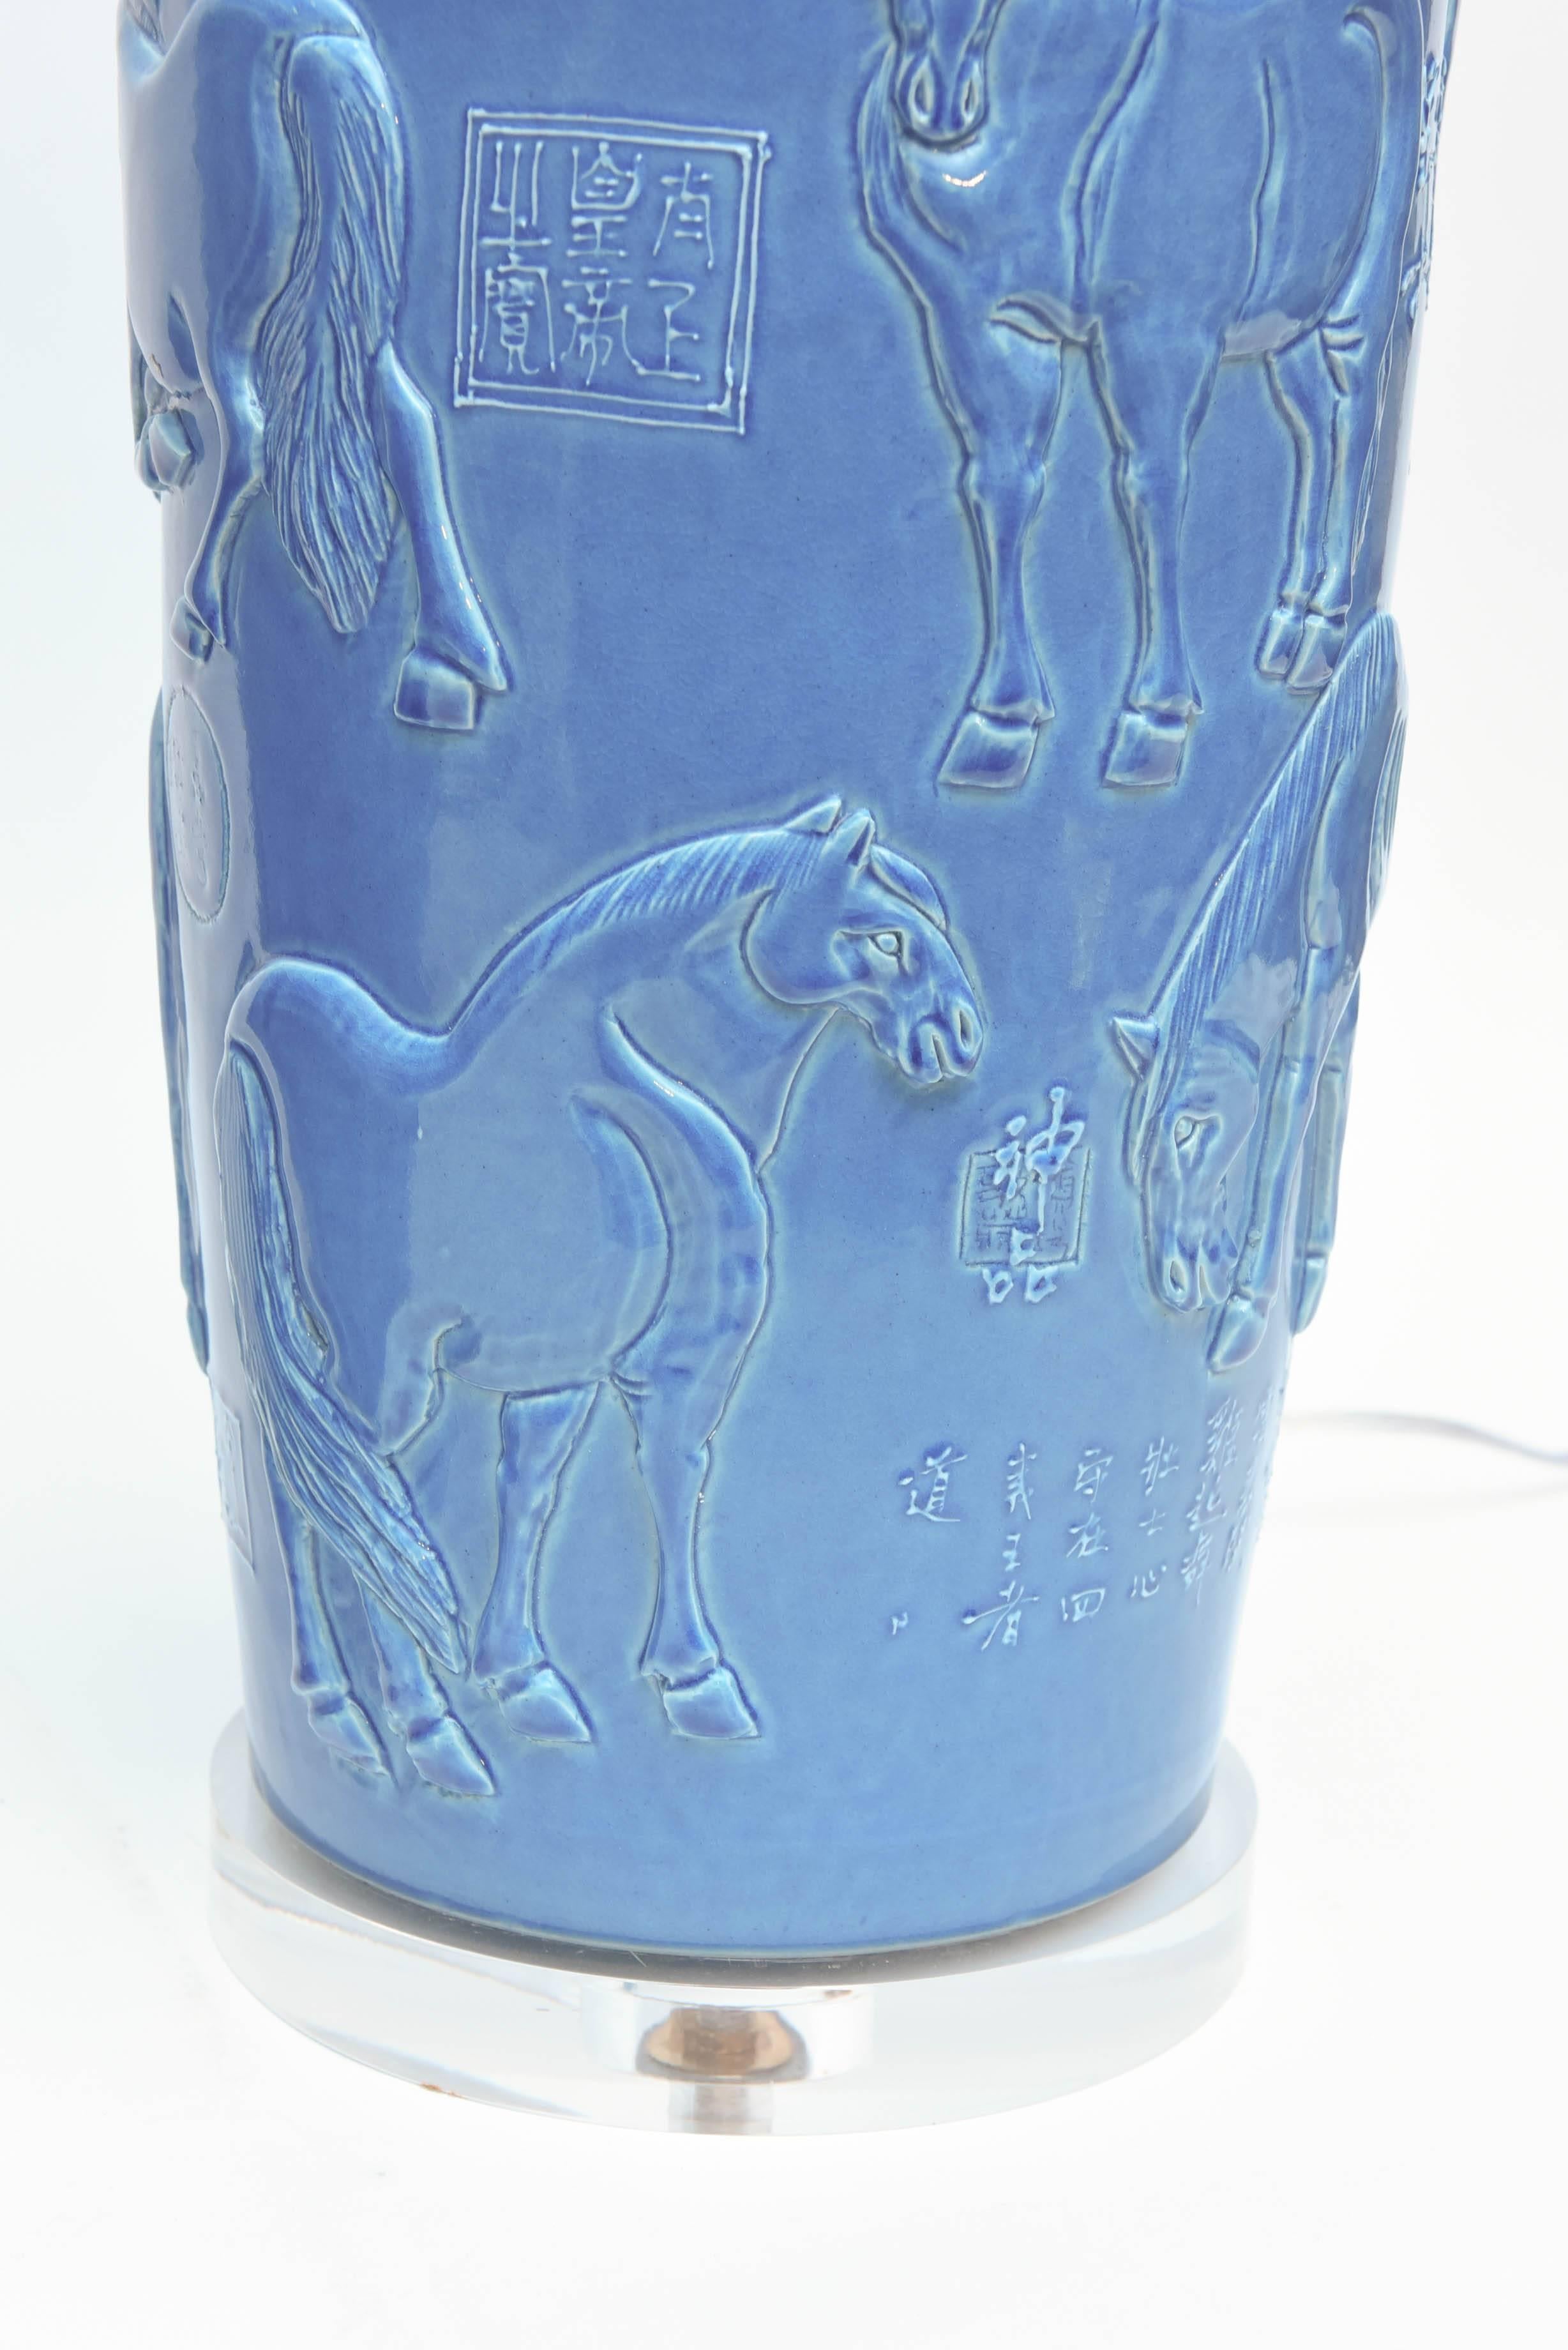 The pieces are decorated with figures of horses. The pieces are signed with extensive calligraphy - custom mounted on Lucite bases (shades excluded).